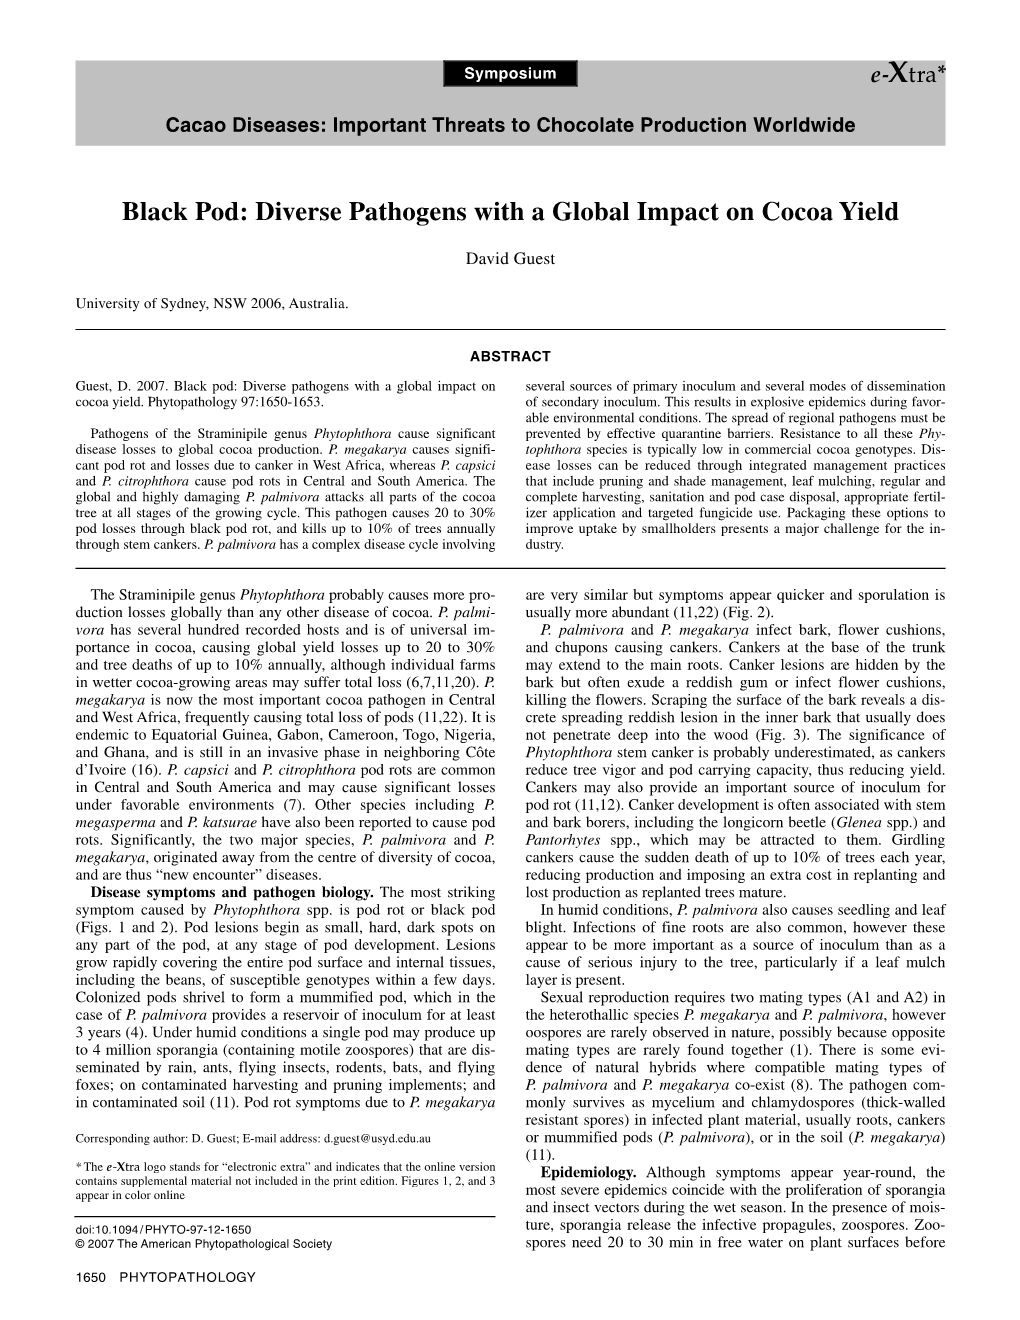 Black Pod: Diverse Pathogens with a Global Impact on Cocoa Yield